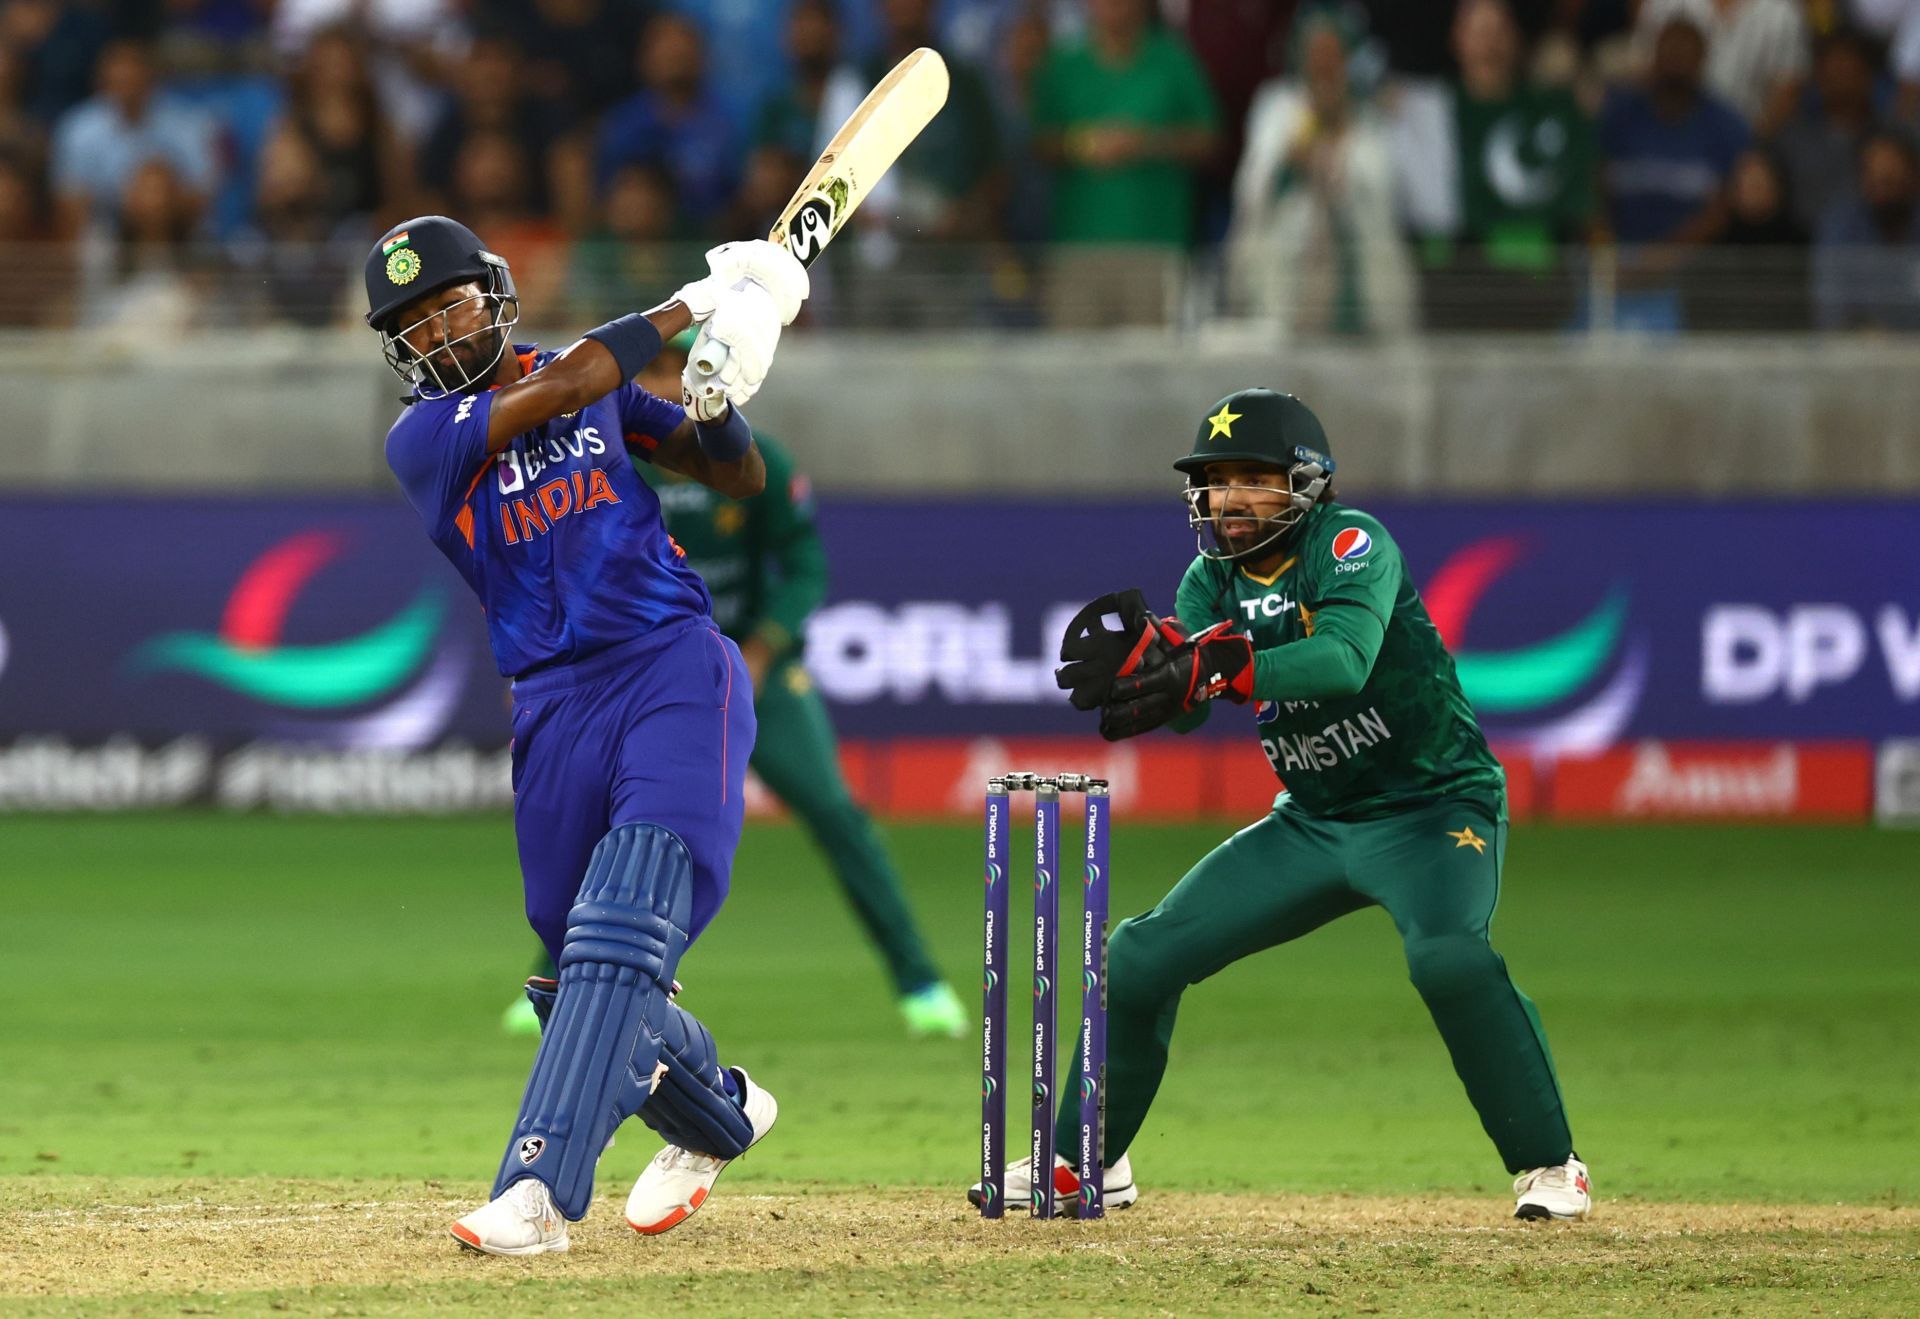 Hardik Pandya batting against Pakistan during the Asia Cup. Pic: Getty Images